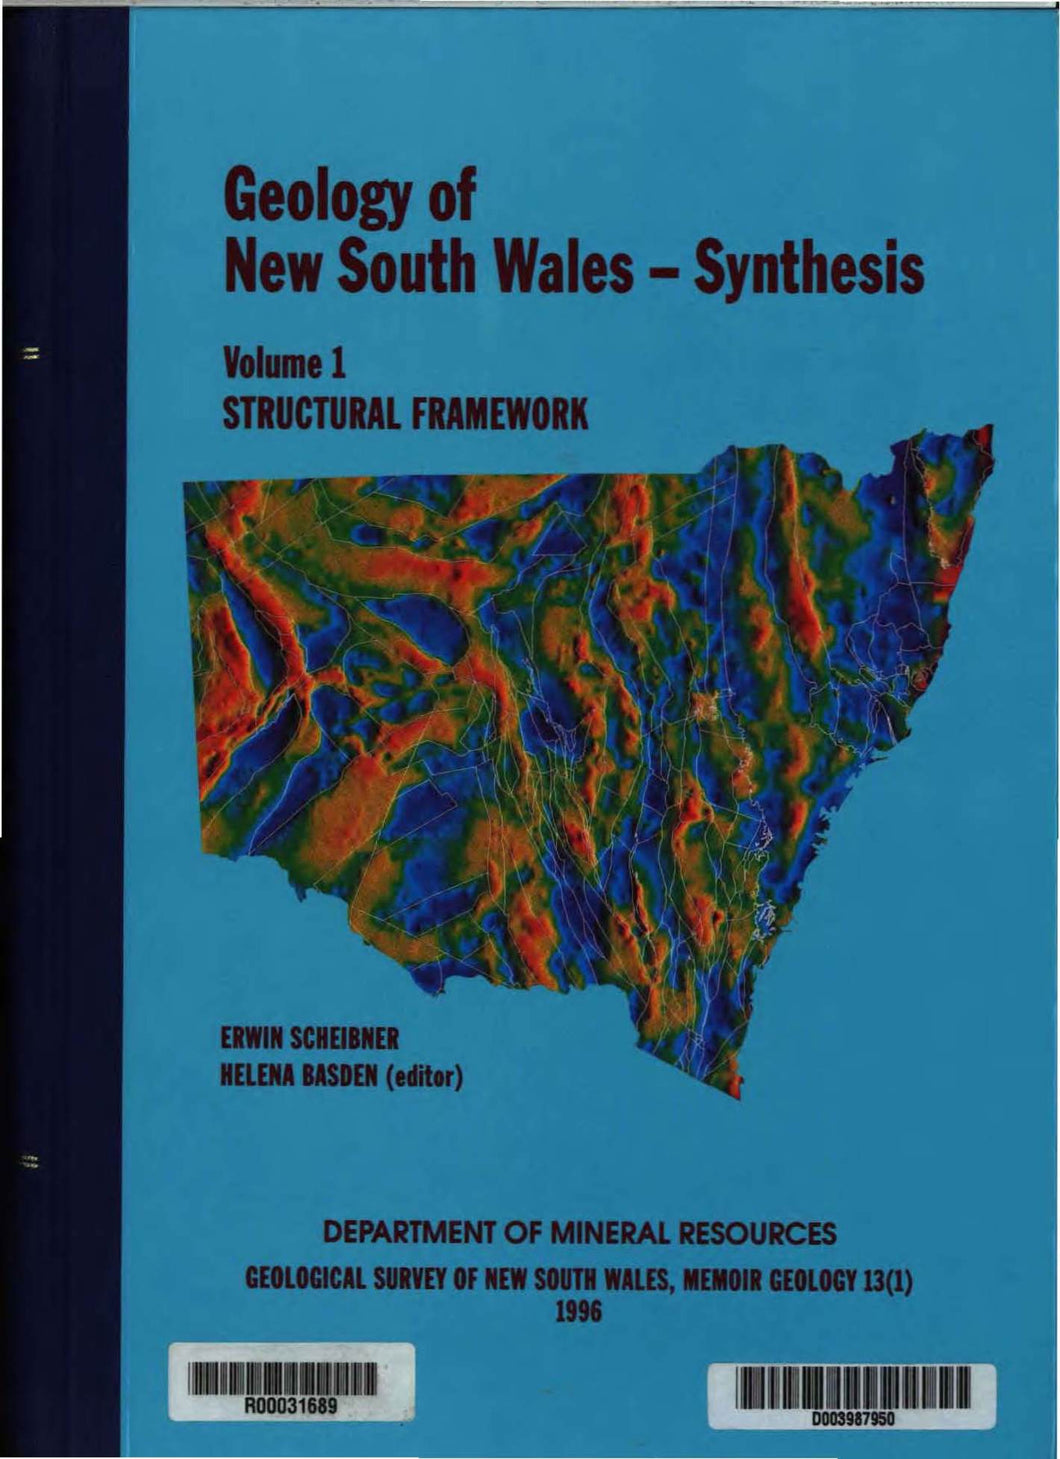 Image of Geology of New South Wales Memoir 13   Synthesis. Volume 1 Structural Framework book cover